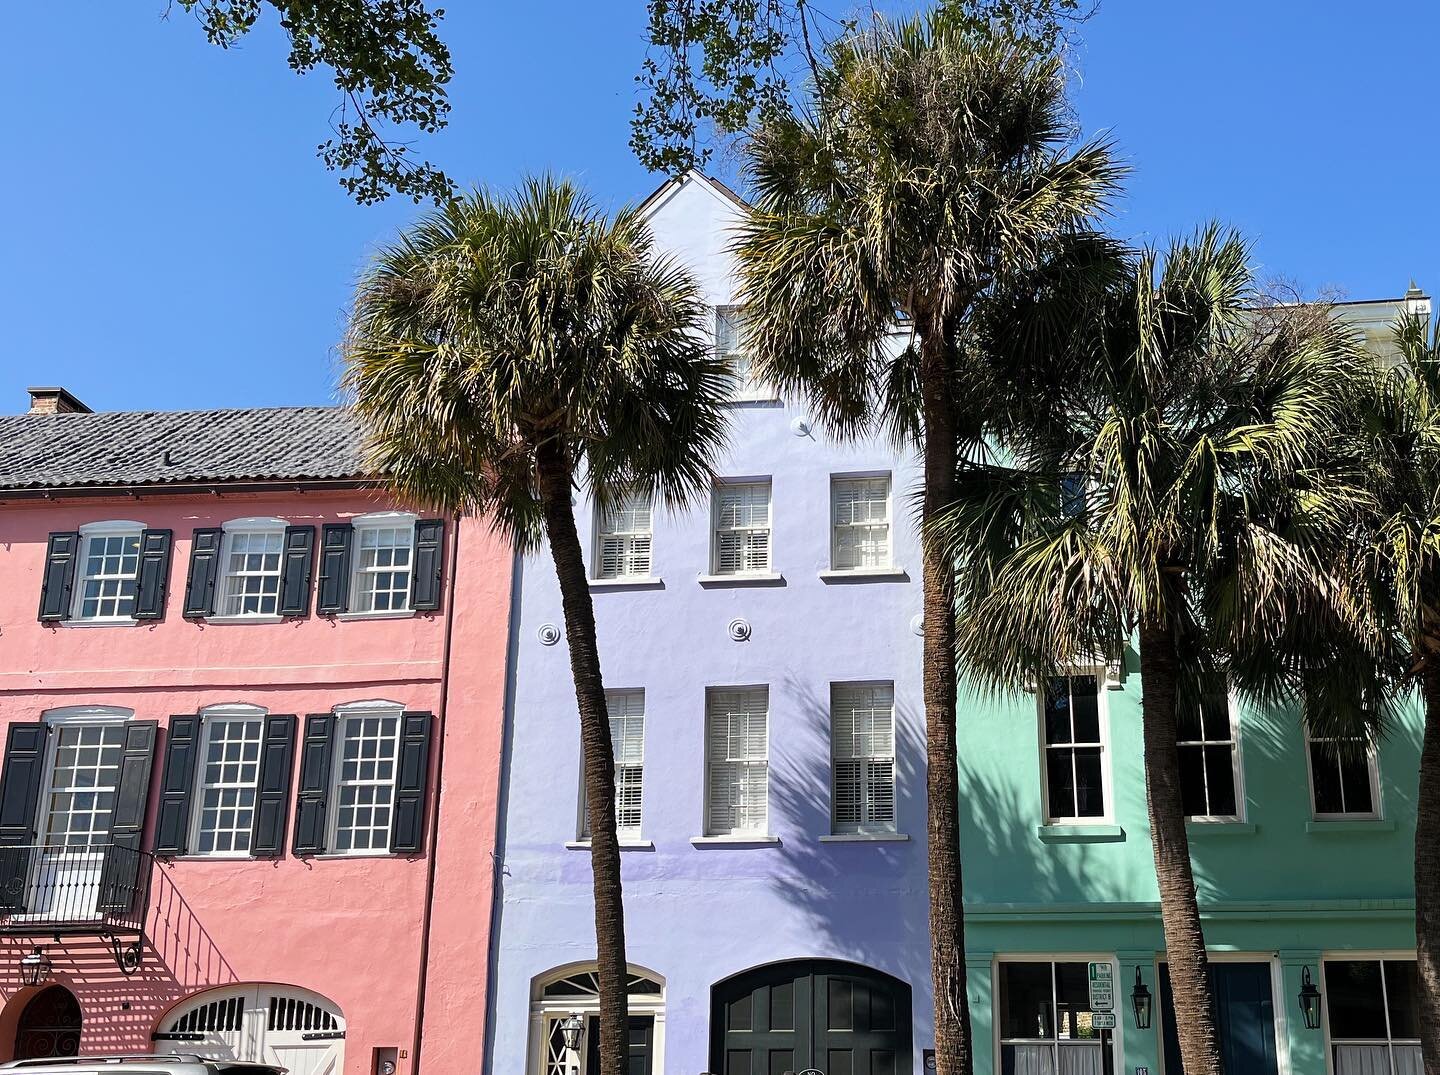 as promised, my two-day travel recap &amp; itinerary for Charleston, SC is live at the link in my bio! it includes a looooot of food recommendations, some drink spots, and a couple of activities to keep ya busy.

this is new for me, sharing my travel